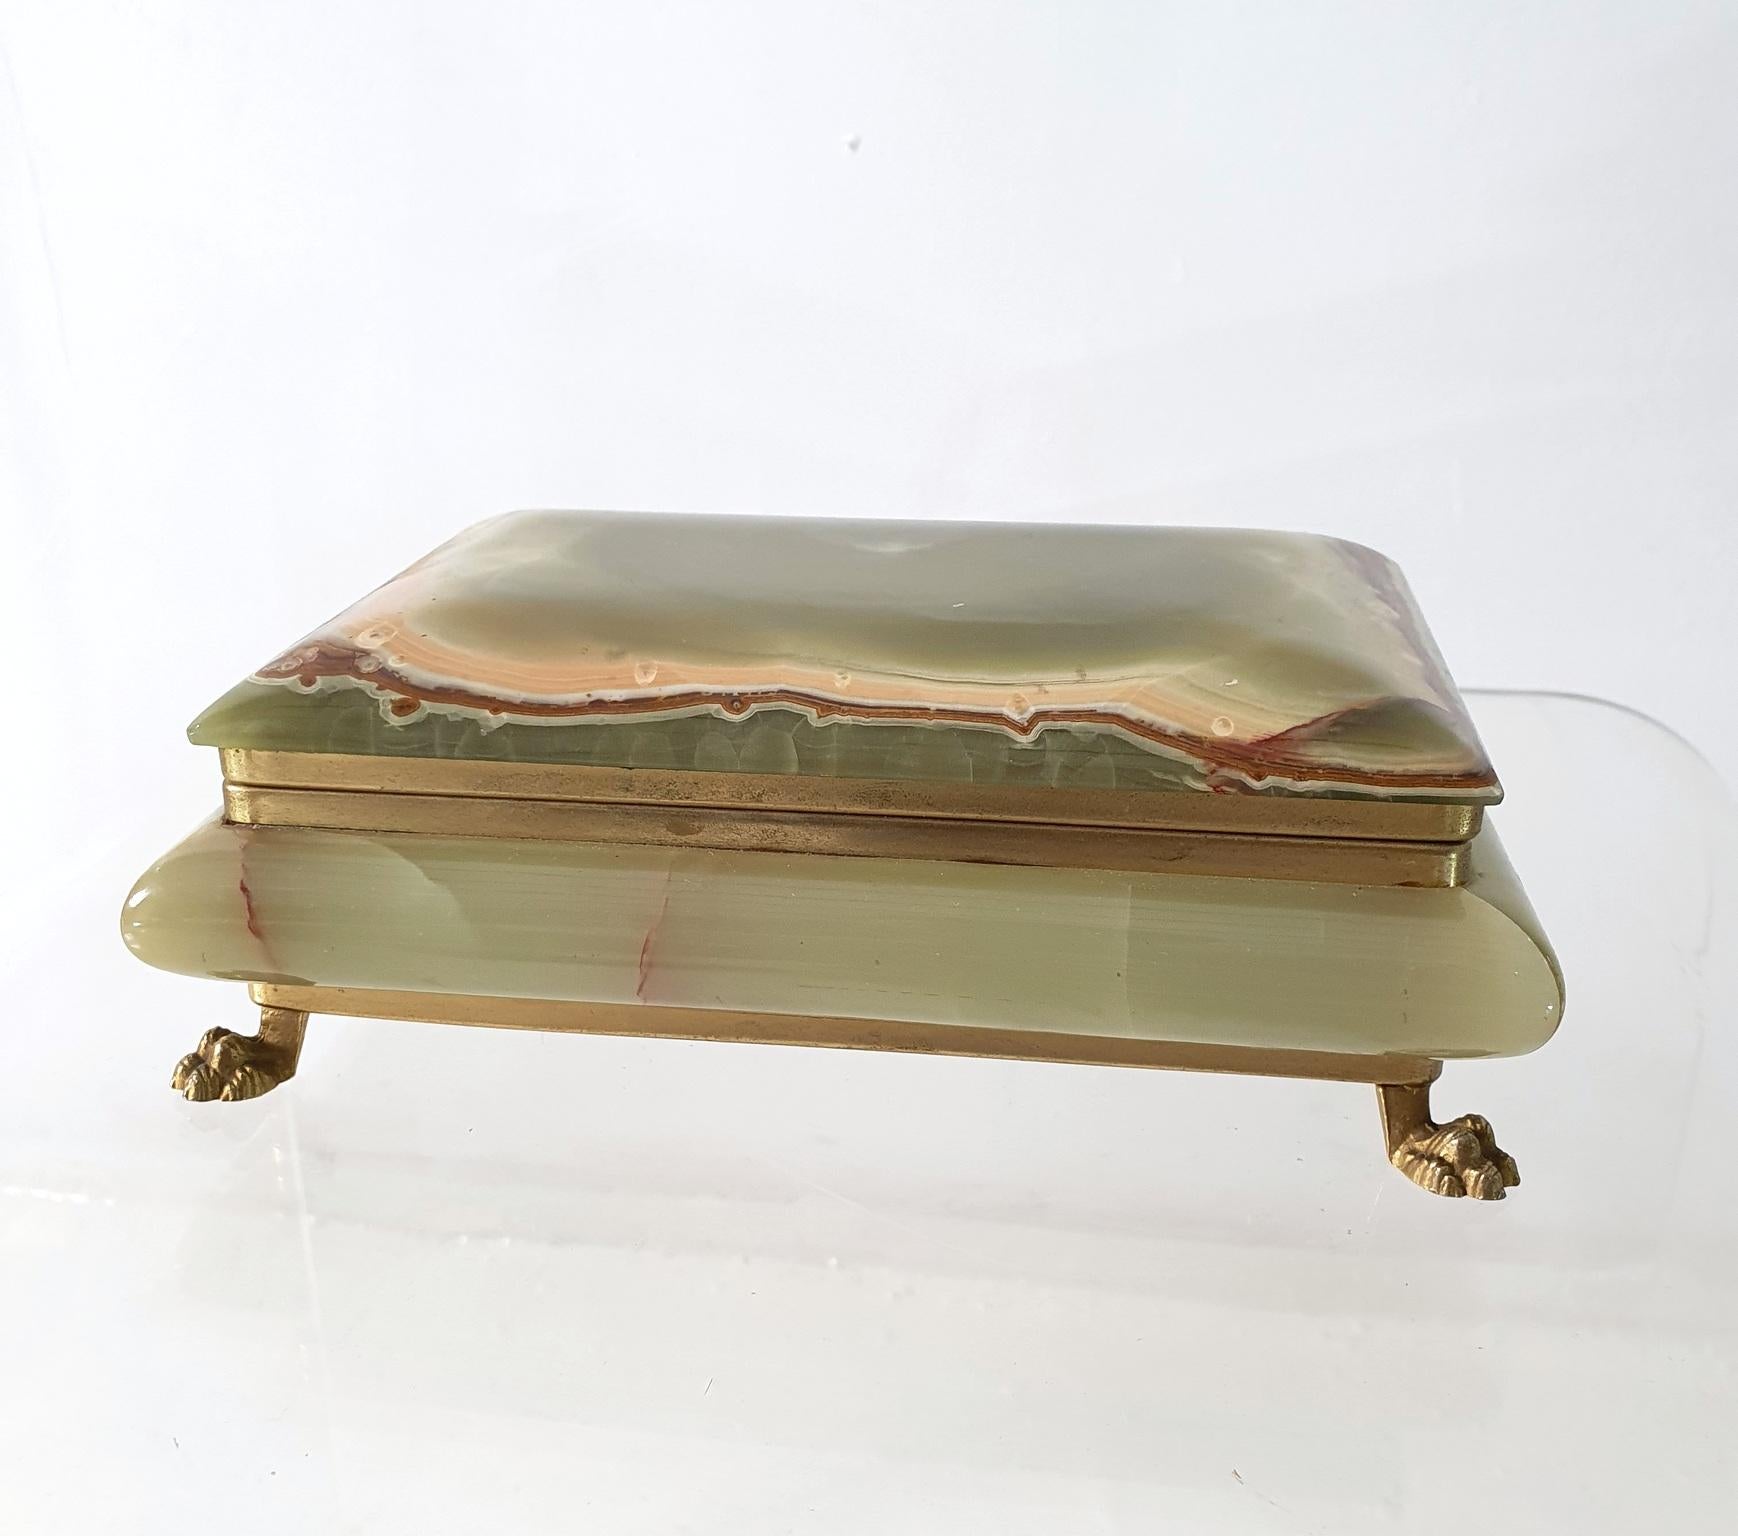 A large trinket or jewelry box with a hinged lid and made all in onyx and gilded feet. The onyx has a range of colors from red, brown, yellow and green.